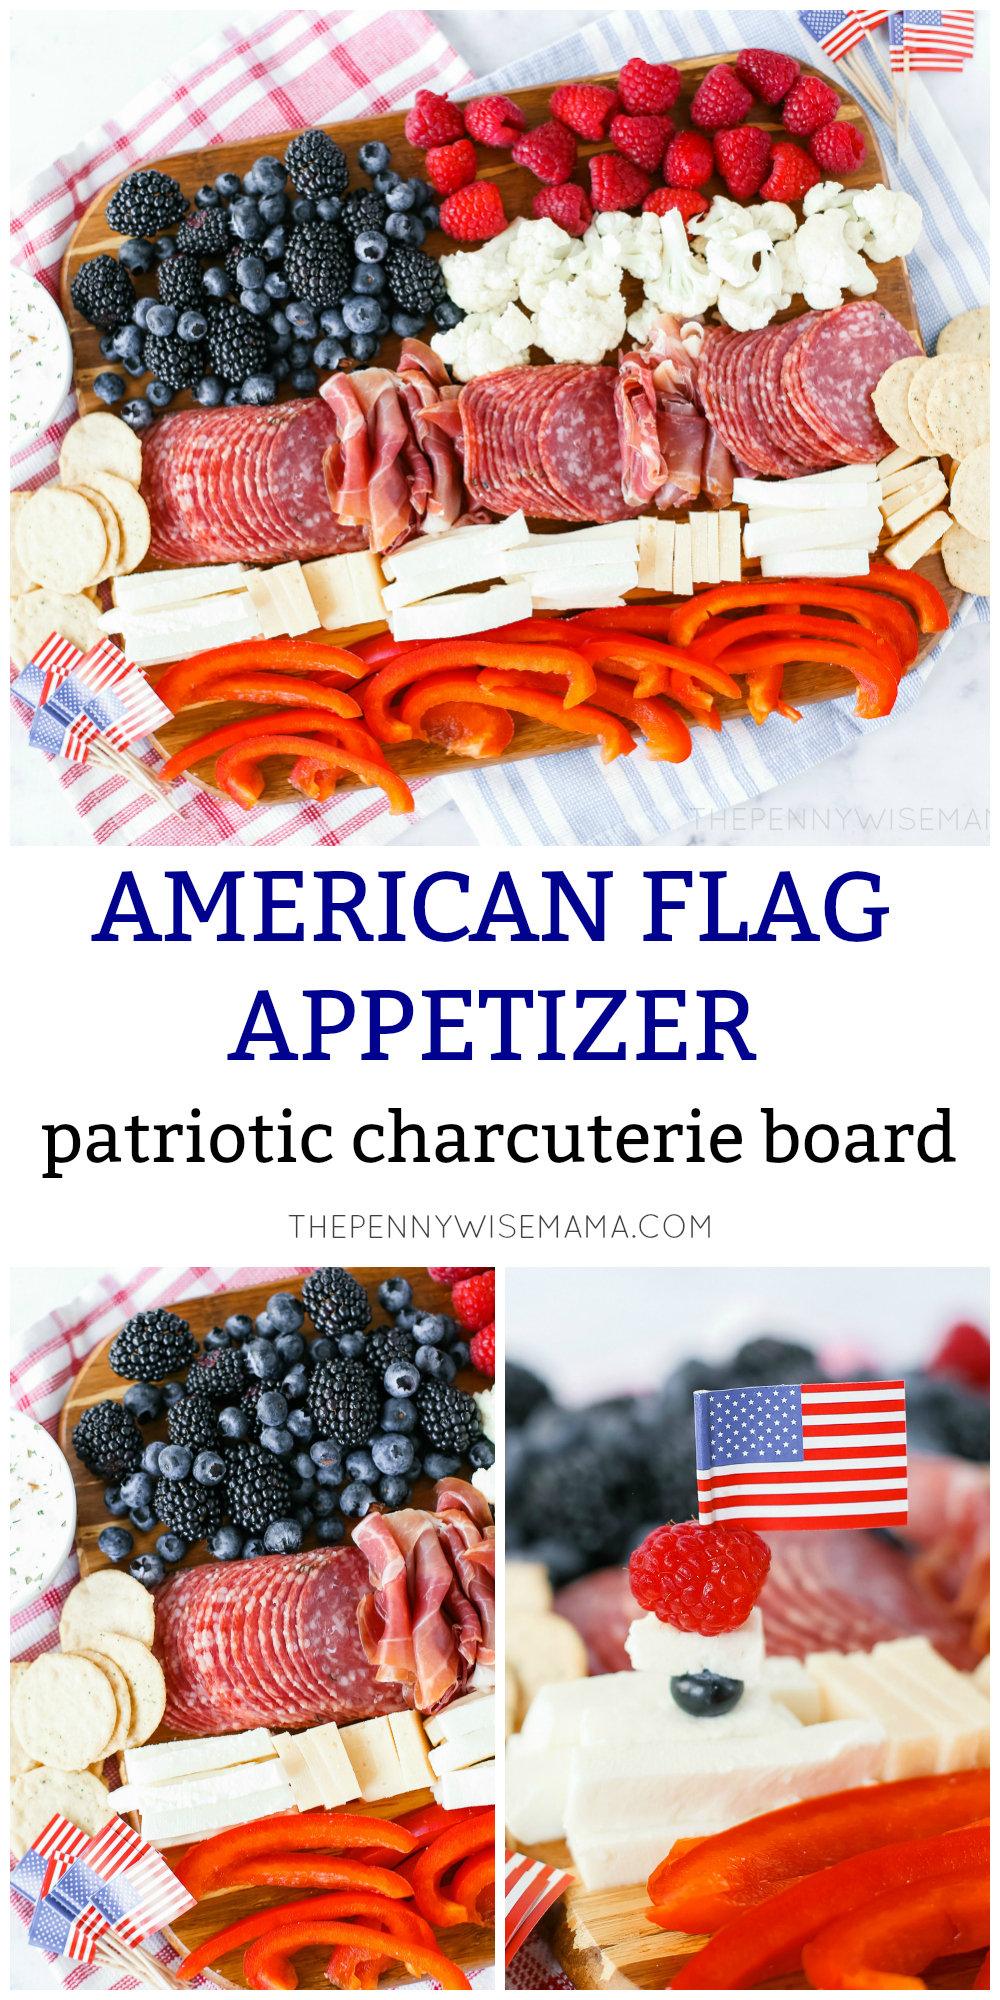 Patriotic Charcuterie Board - An American Flag Meat and Cheese Board. A perfect appetizer for the Fourth of July!